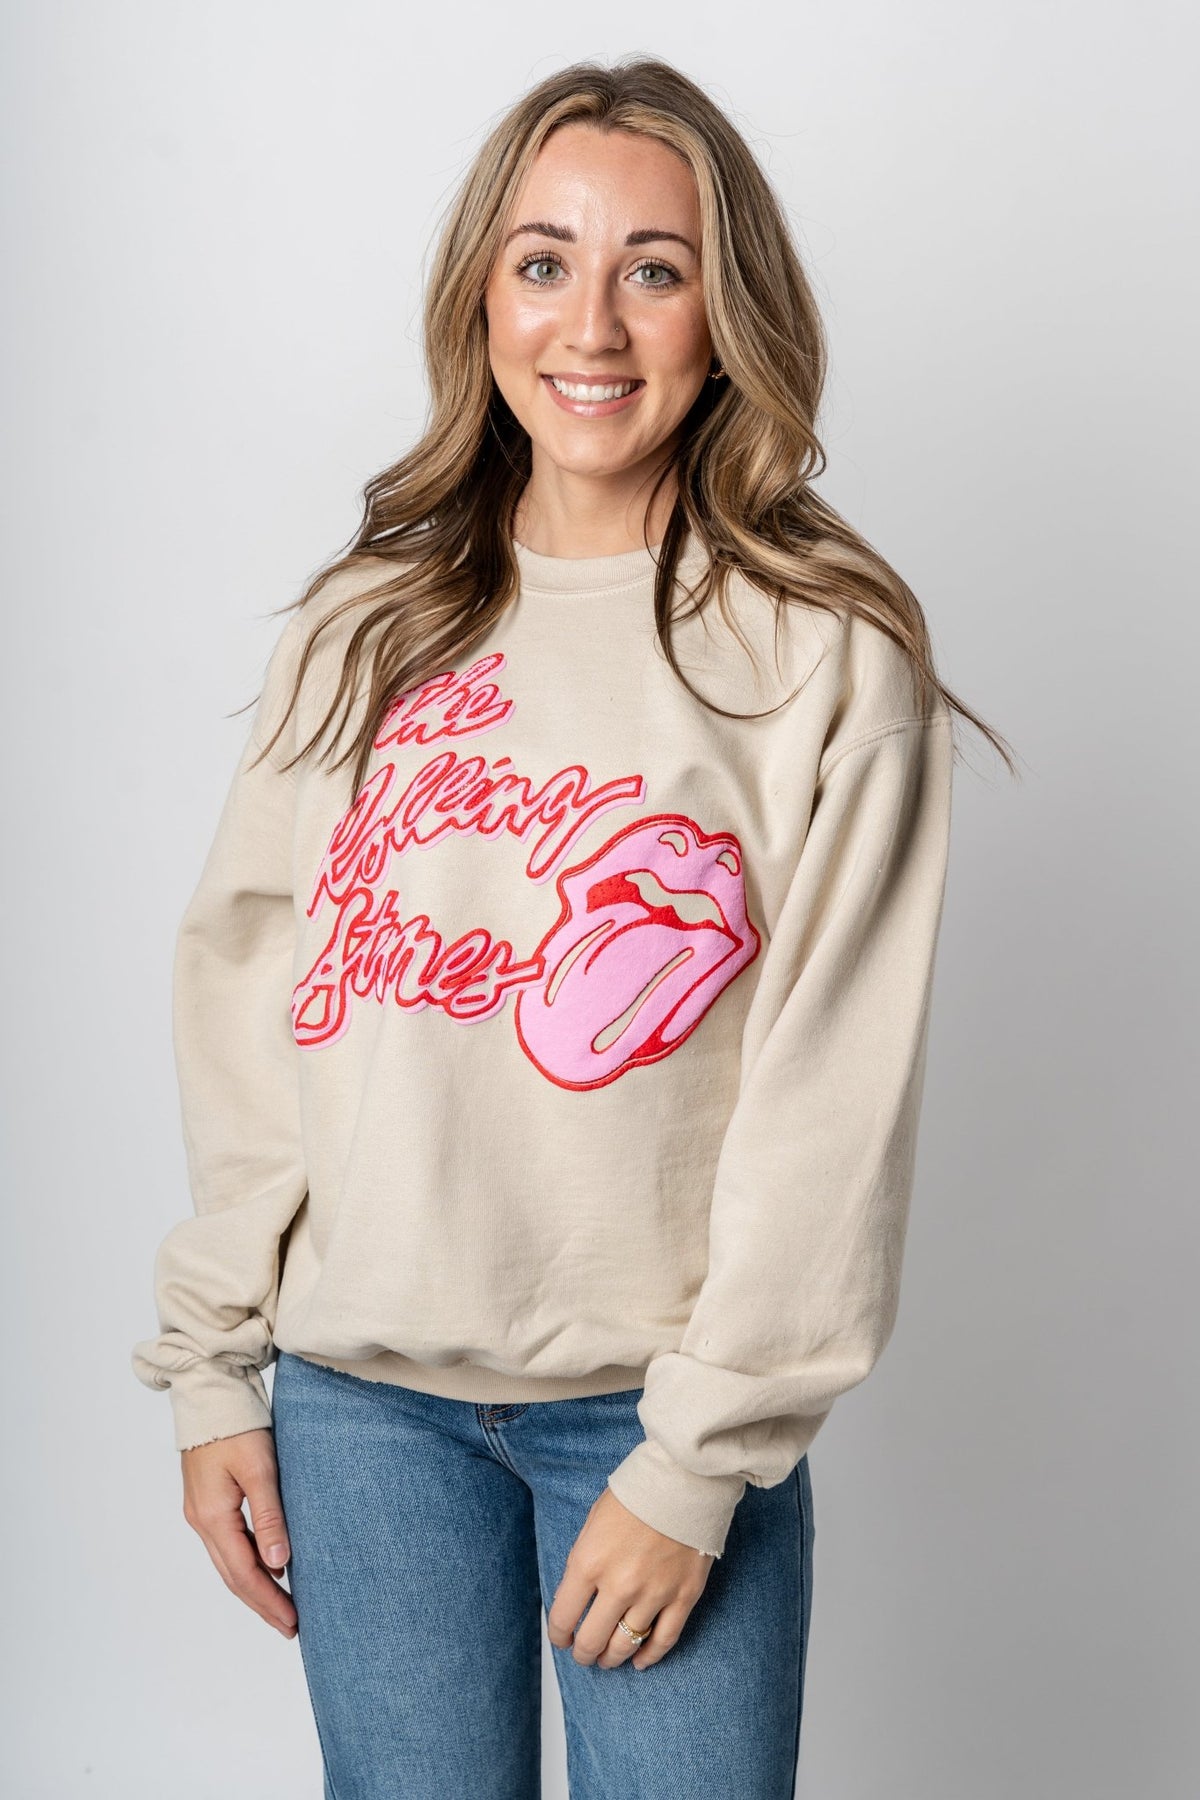 Rolling Stones malibu puff ink thrifted sweatshirt sand - Trendy Band T-Shirts and Sweatshirts at Lush Fashion Lounge Boutique in Oklahoma City